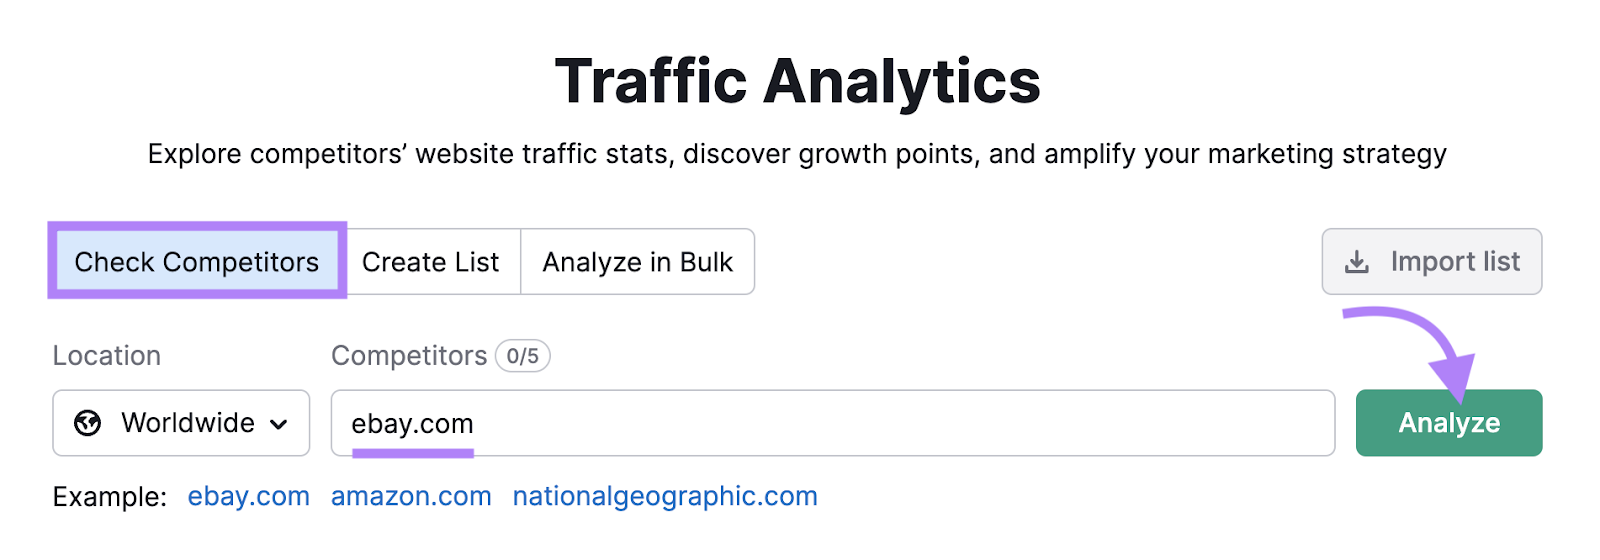 search for your competitors in Traffic Analytics tool to get insights into marketing channels that work for them